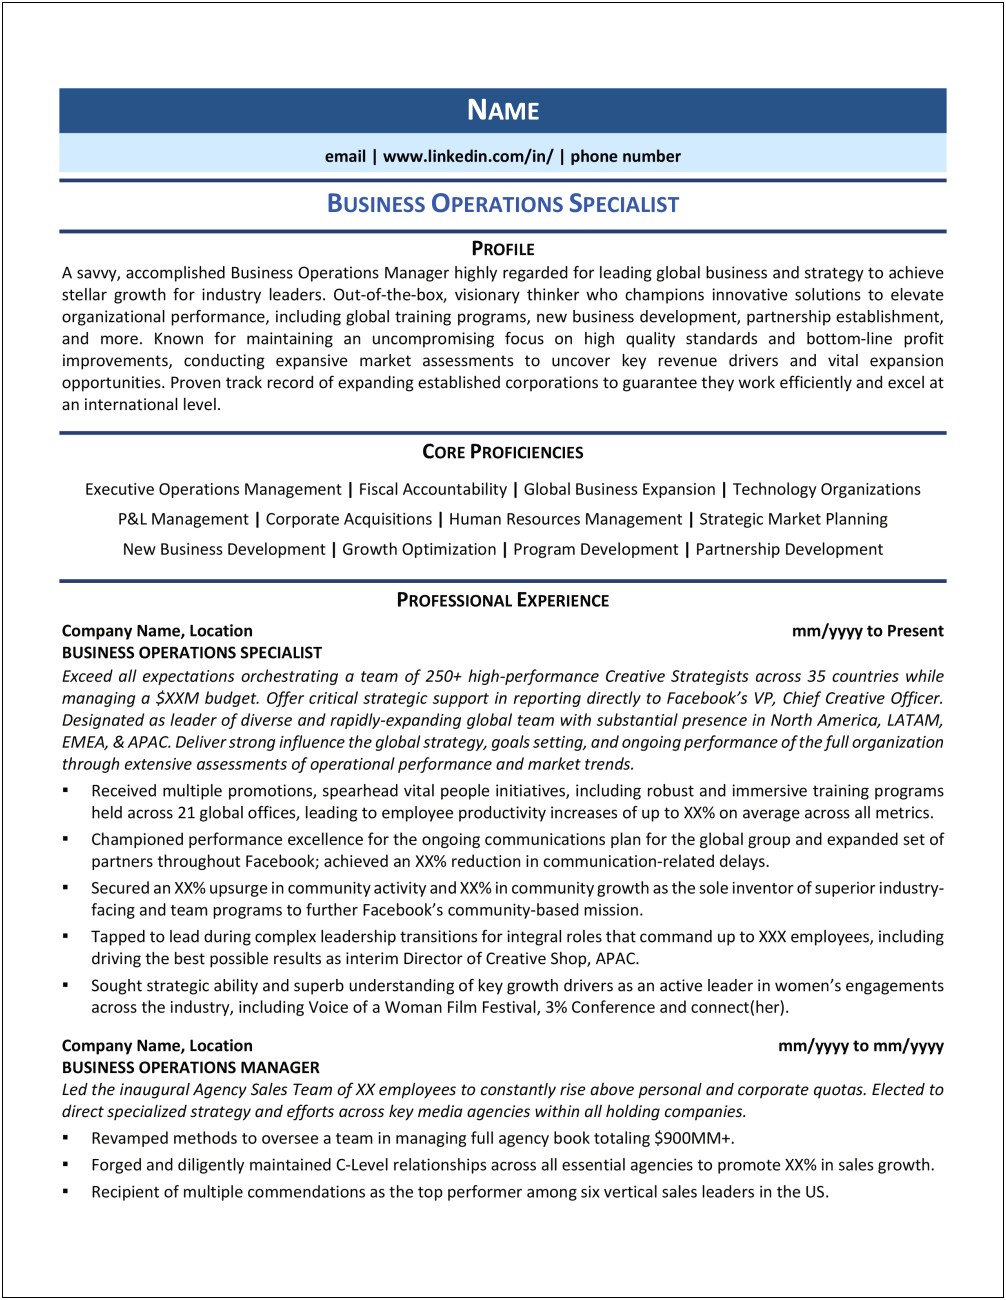 Resume Objective For Operations Specialist